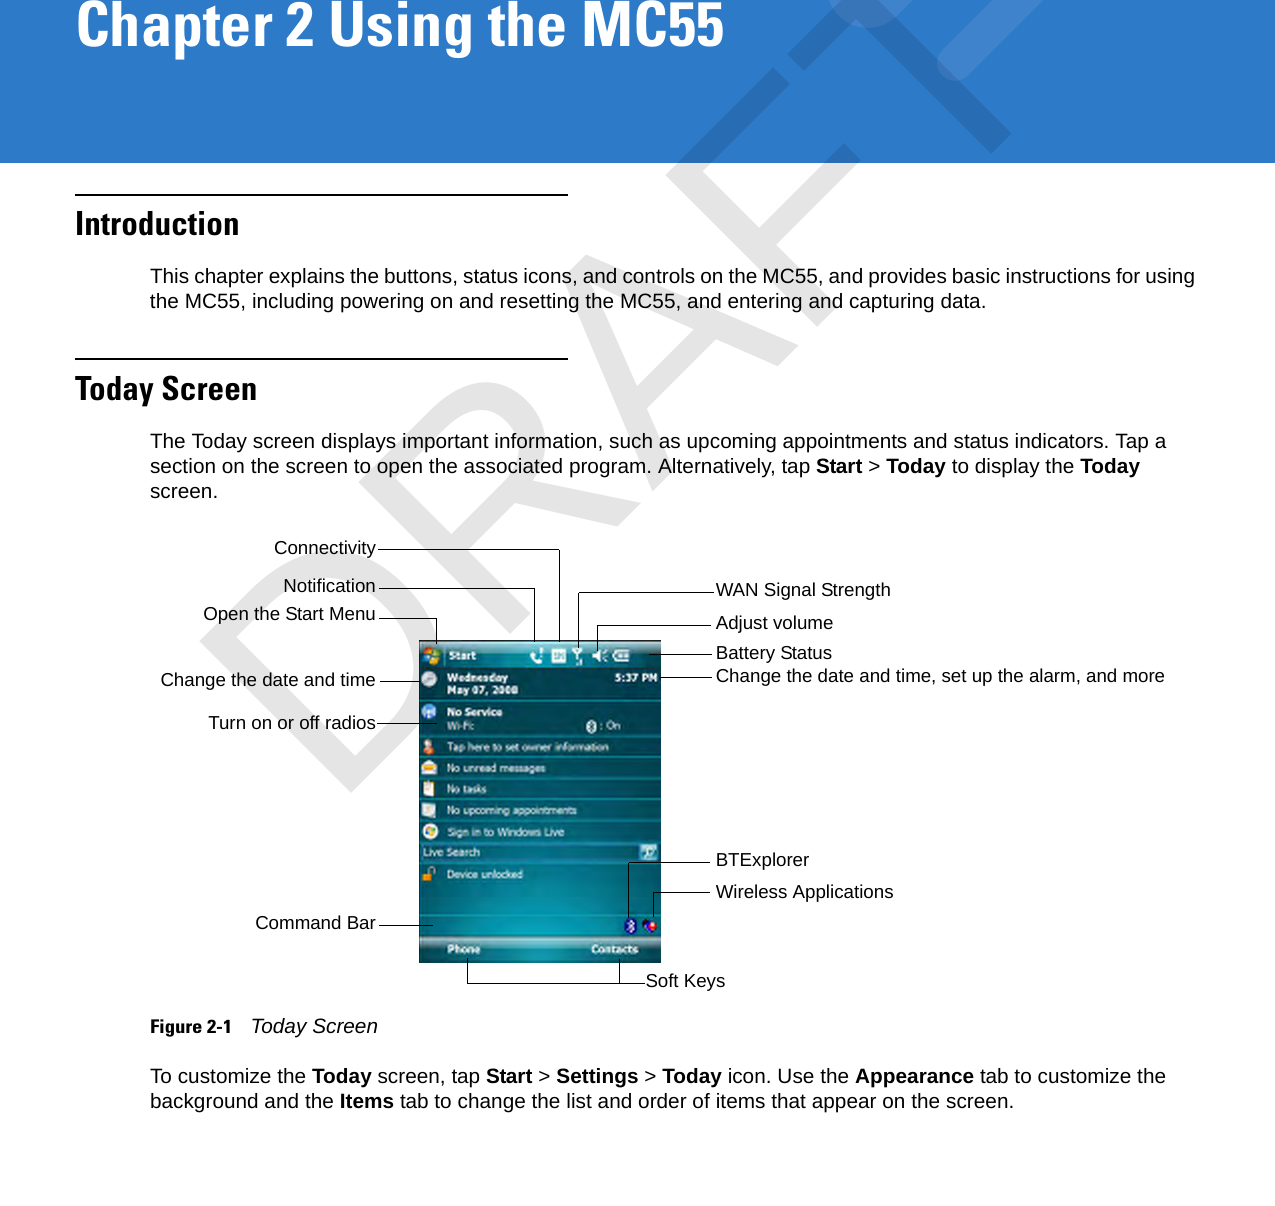 Chapter 2 Using the MC55IntroductionThis chapter explains the buttons, status icons, and controls on the MC55, and provides basic instructions for using the MC55, including powering on and resetting the MC55, and entering and capturing data.Today ScreenThe Today screen displays important information, such as upcoming appointments and status indicators. Tap a section on the screen to open the associated program. Alternatively, tap Start &gt; Today to display the Today screen.Figure 2-1    Today ScreenTo customize the Today screen, tap Start &gt; Settings &gt; Today icon. Use the Appearance tab to customize the background and the Items tab to change the list and order of items that appear on the screen.Open the Start Menu Adjust volumeChange the date and timeSoft KeysBattery StatusCommand BarWAN Signal StrengthTurn on or off radiosChange the date and time, set up the alarm, and moreBTExplorerWireless ApplicationsNotificationConnectivityDRAFT